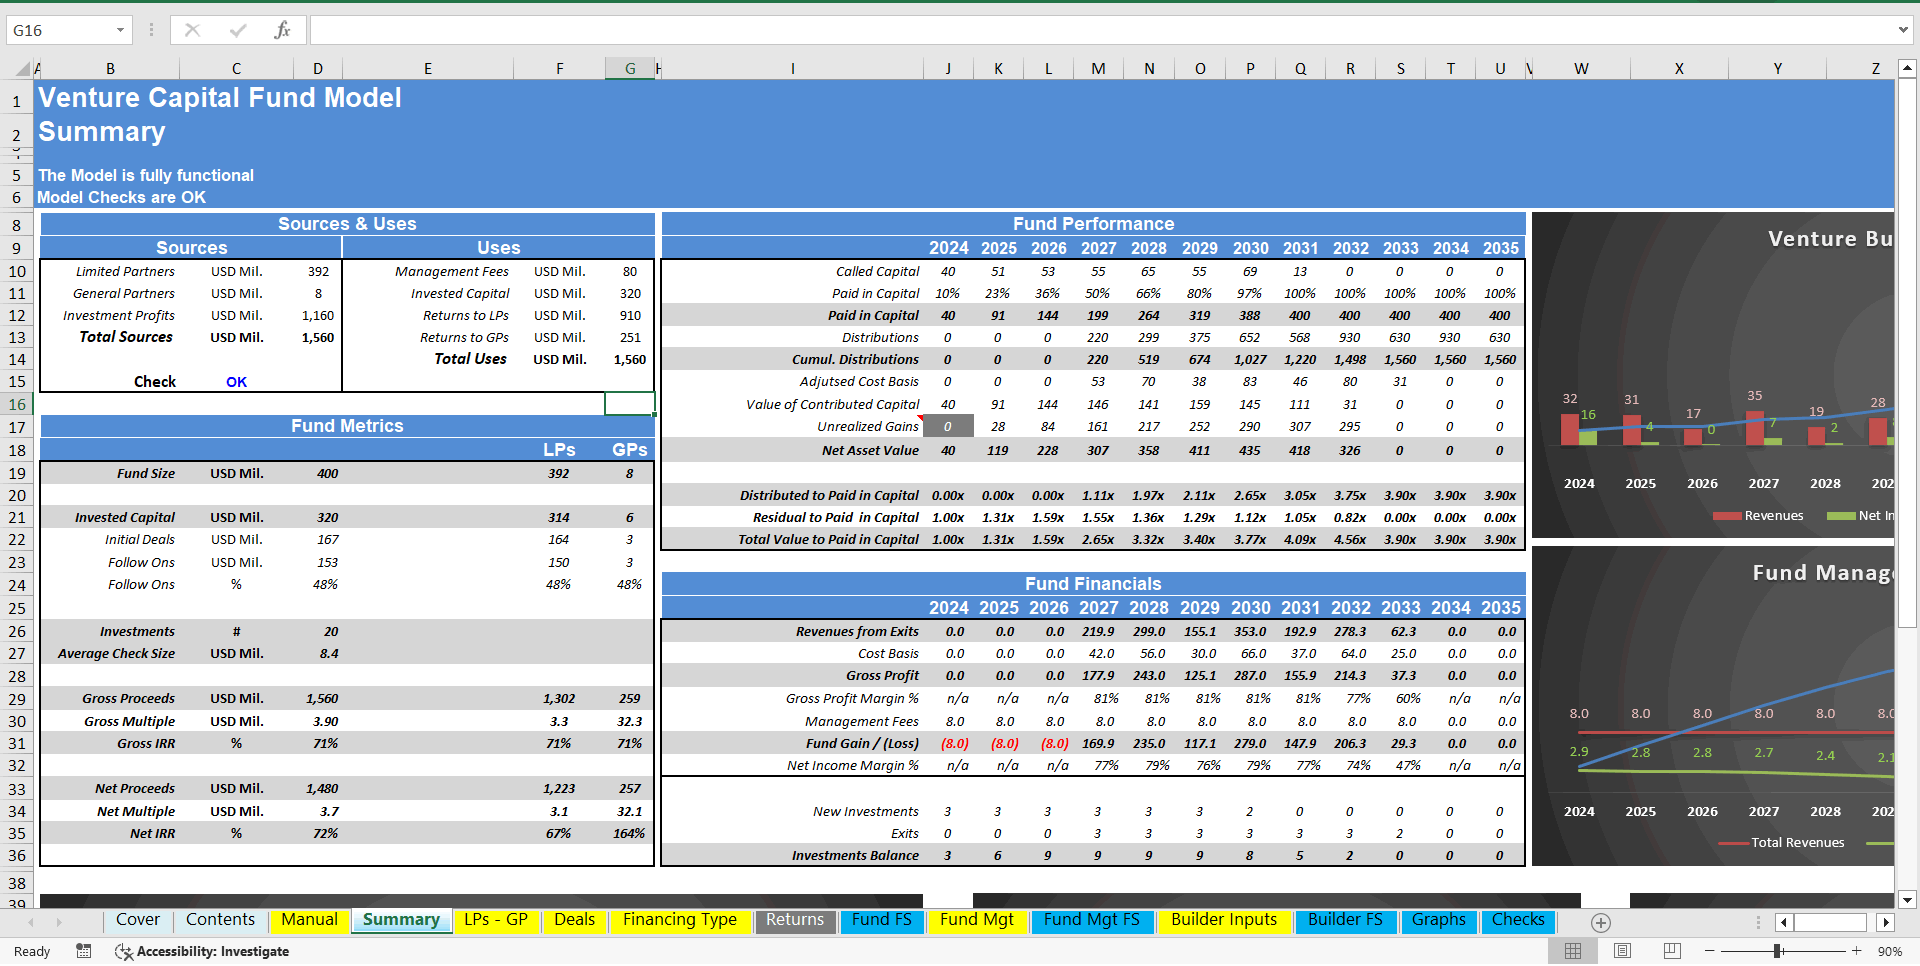 10+ Year Venture Capital Fund Model (Excel template (XLSX)) Preview Image